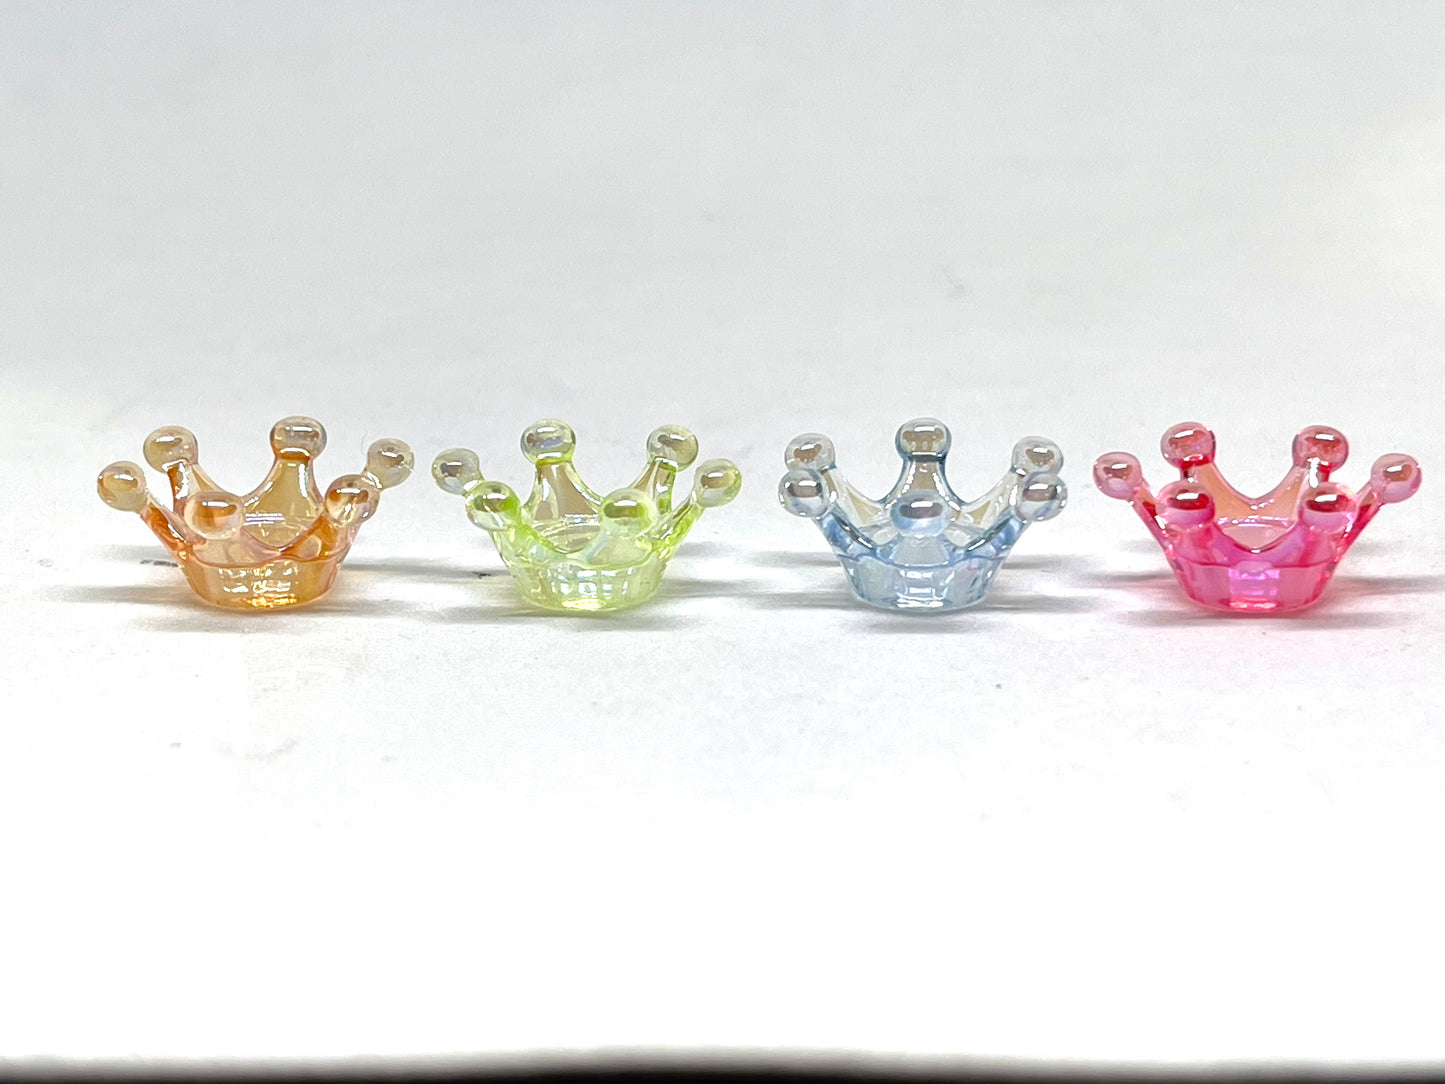 Tiara's Crown Acrylic Beads - Random Mix | Pen Toppers | Spacer Beads | Crown Beads | Colorful Bead